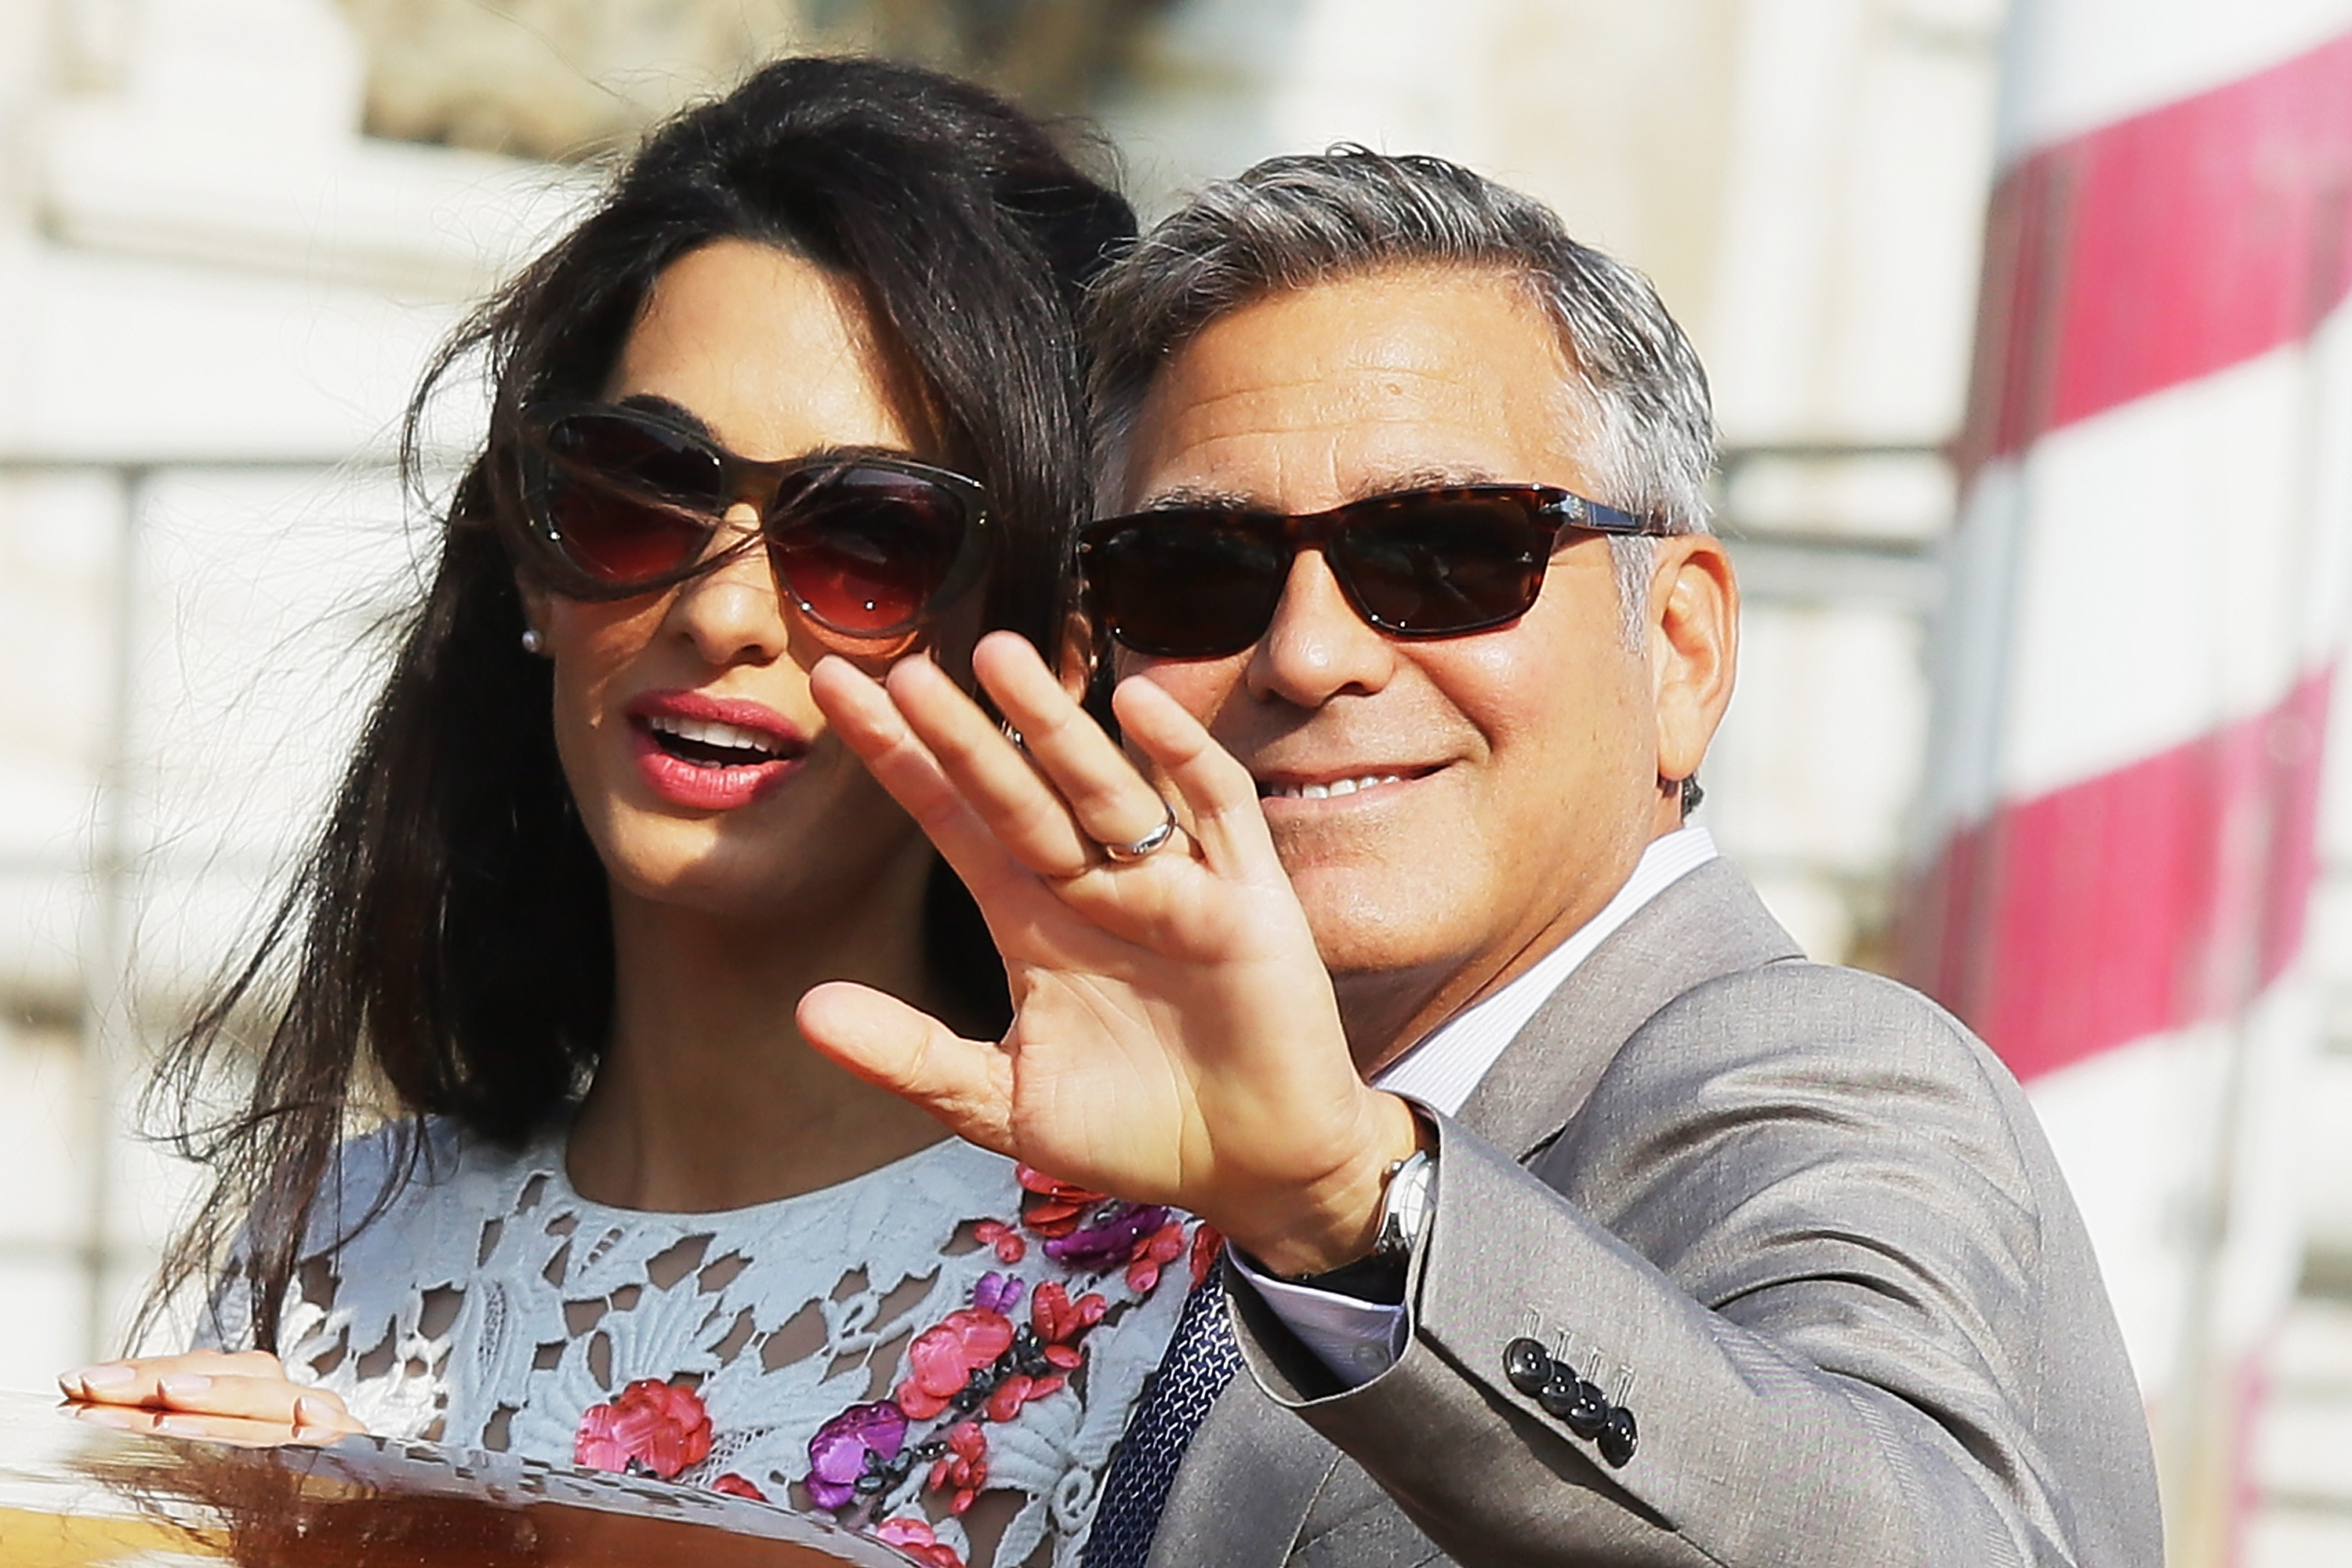 George Clooney and Amal Alamuddin Clooney smiling and wearing sunglasses in Venice